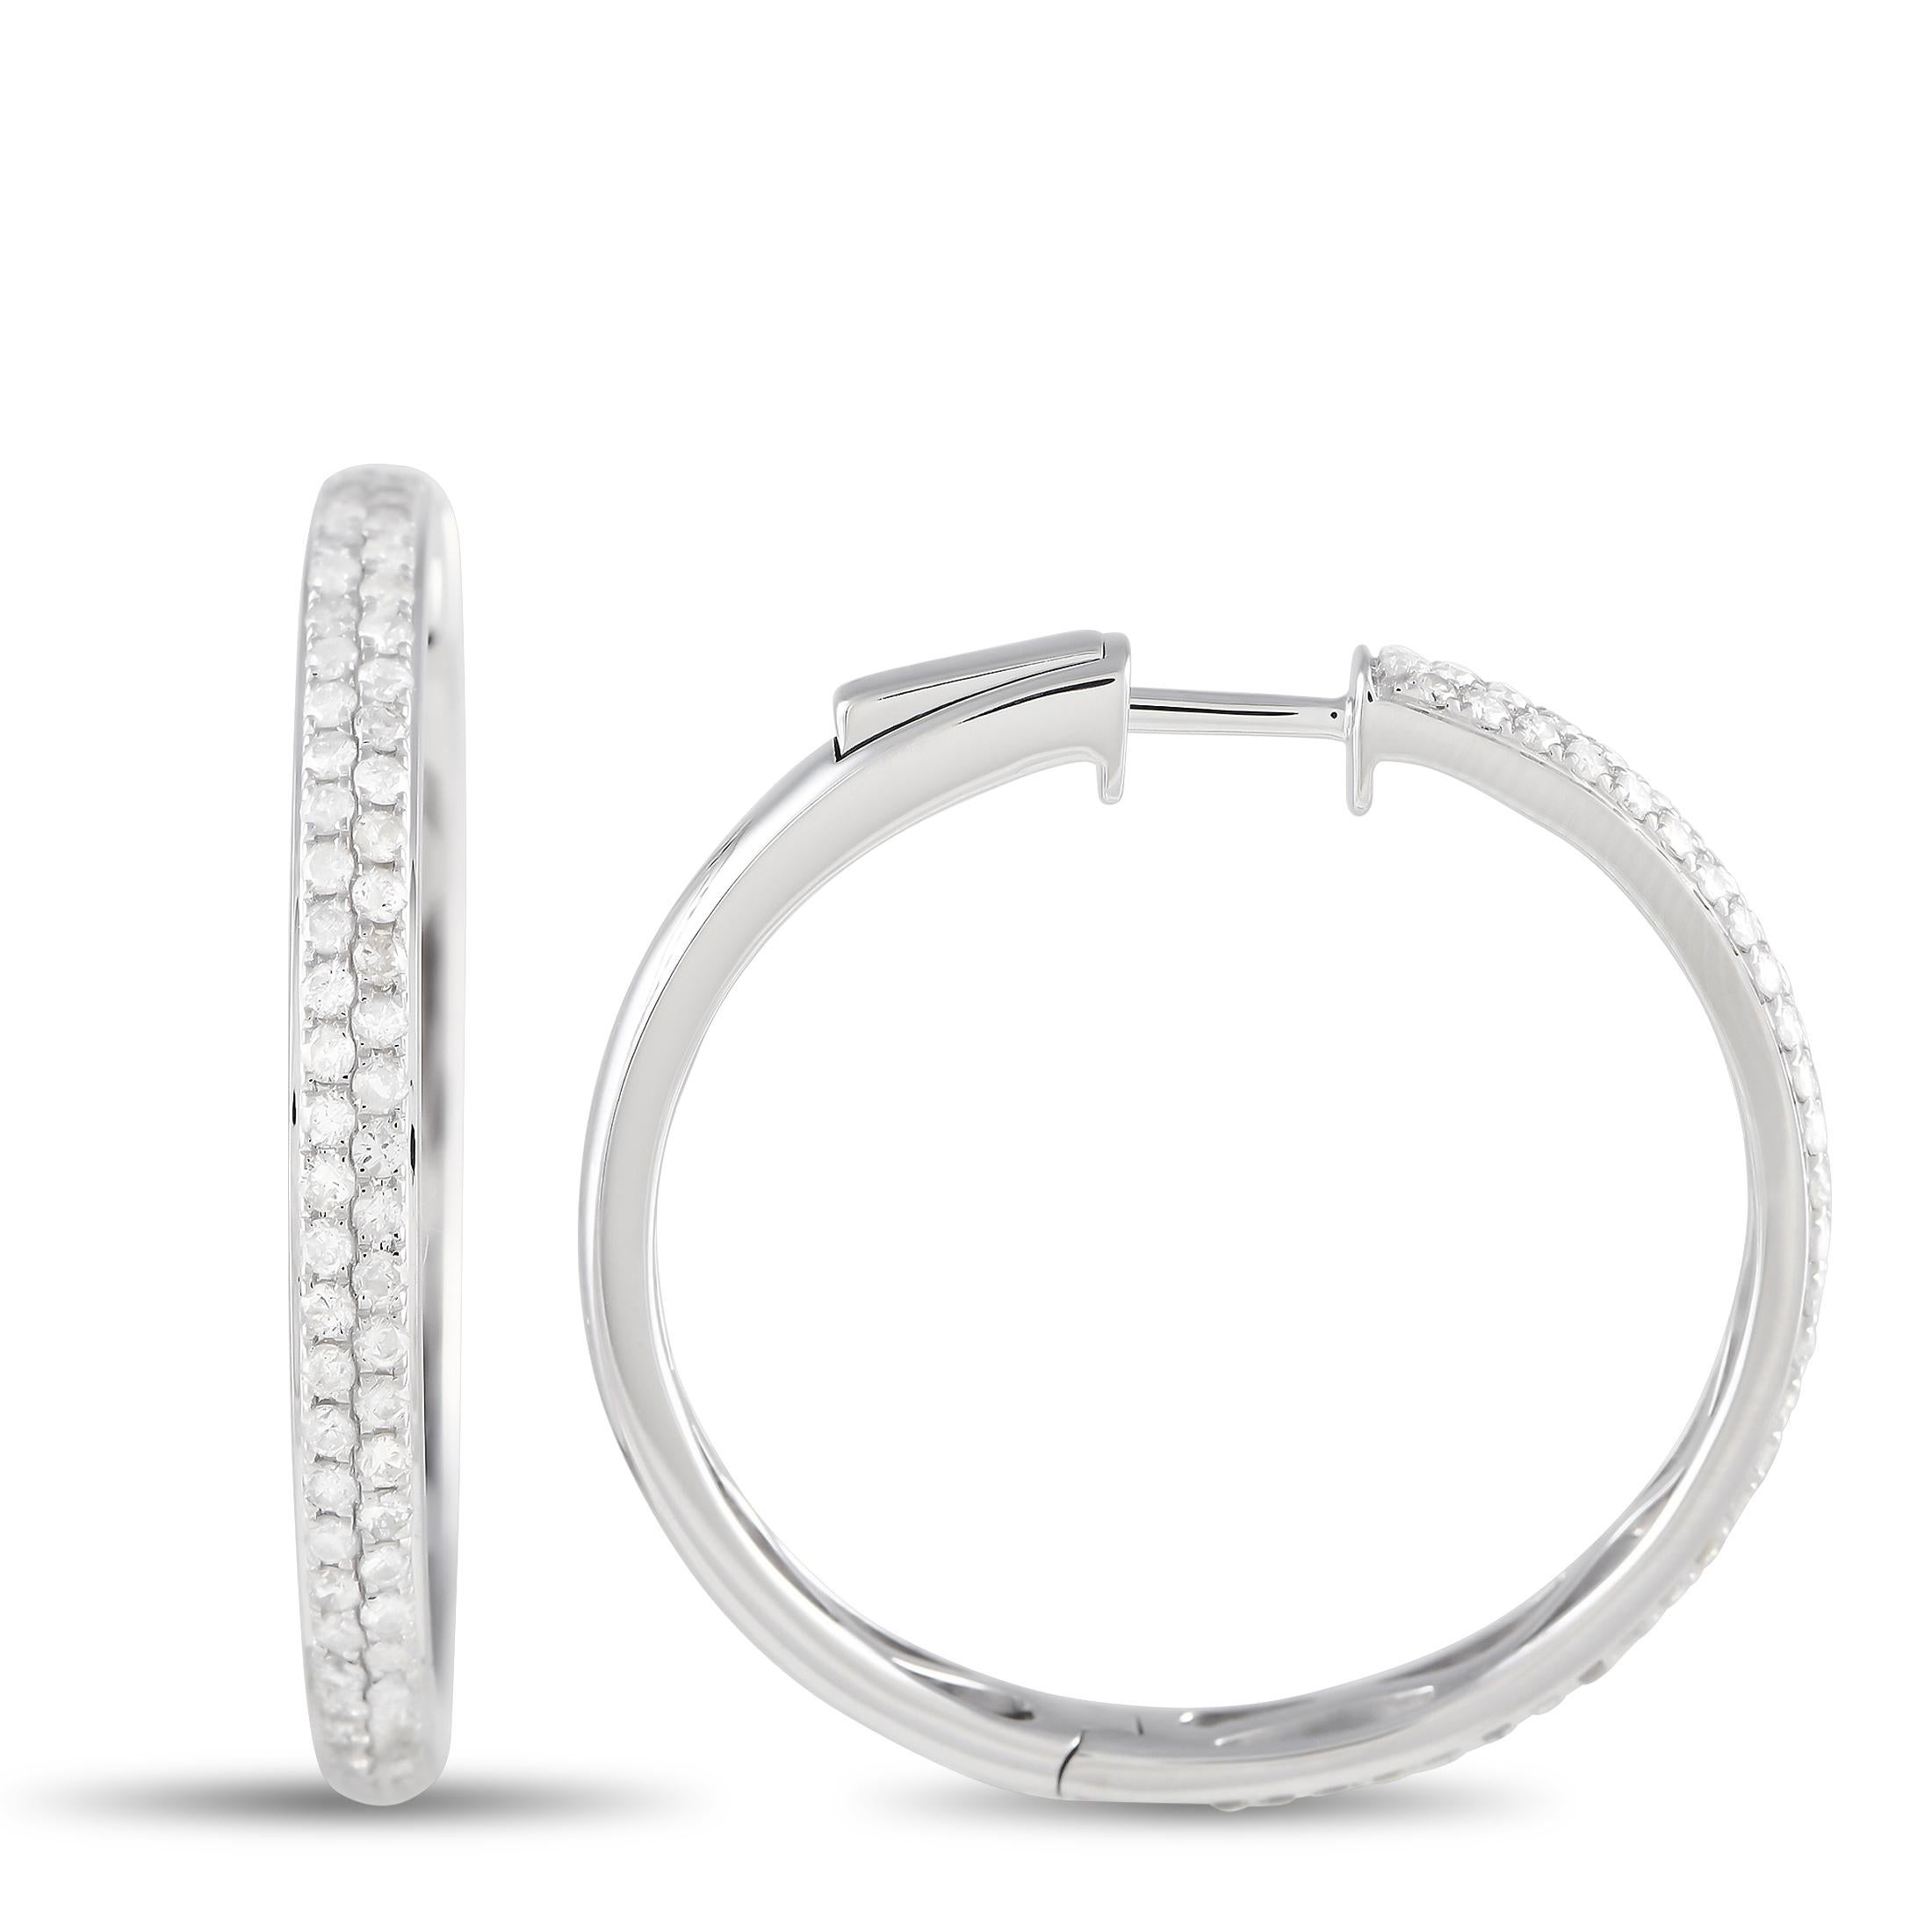 Incredibly stylish, these gorgeous hoop earrings are made of elegant 14K white gold and boast nifty refined appeal with a distinct luxurious feel to it added by the resplendent diamond stones that weigh 1.00 carat in total.